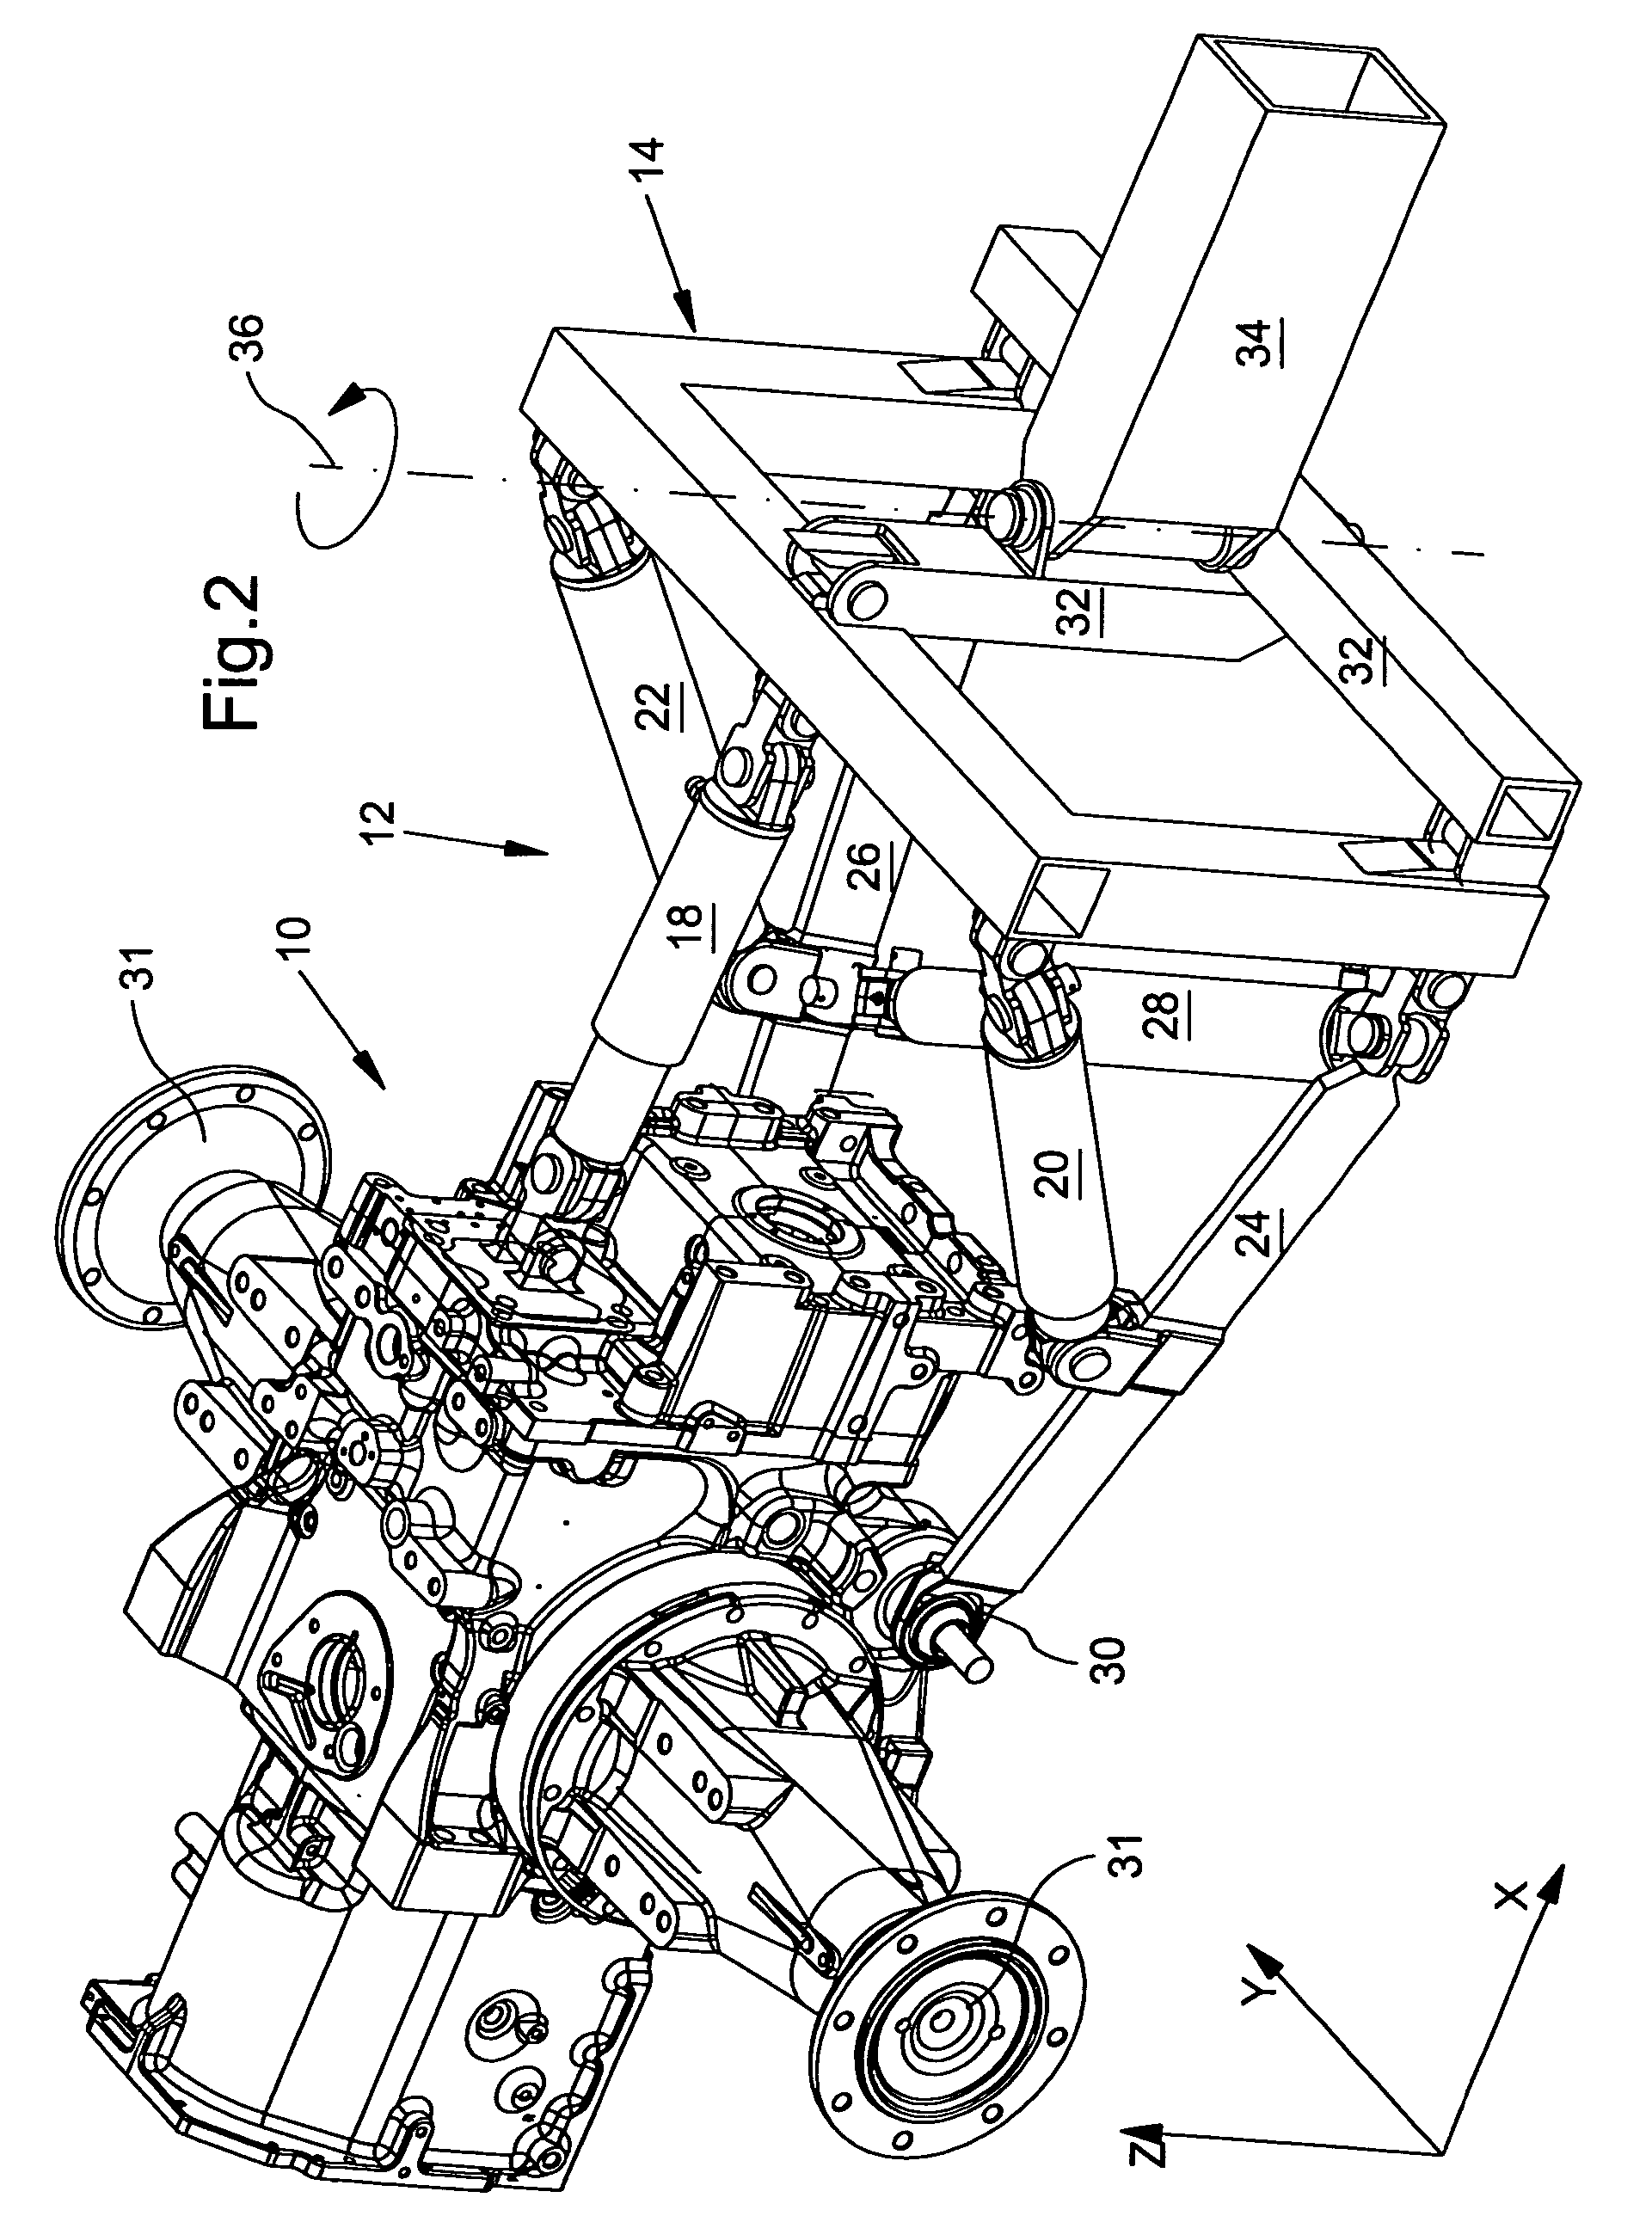 Apparatus for coupling an implement to a working vehicle